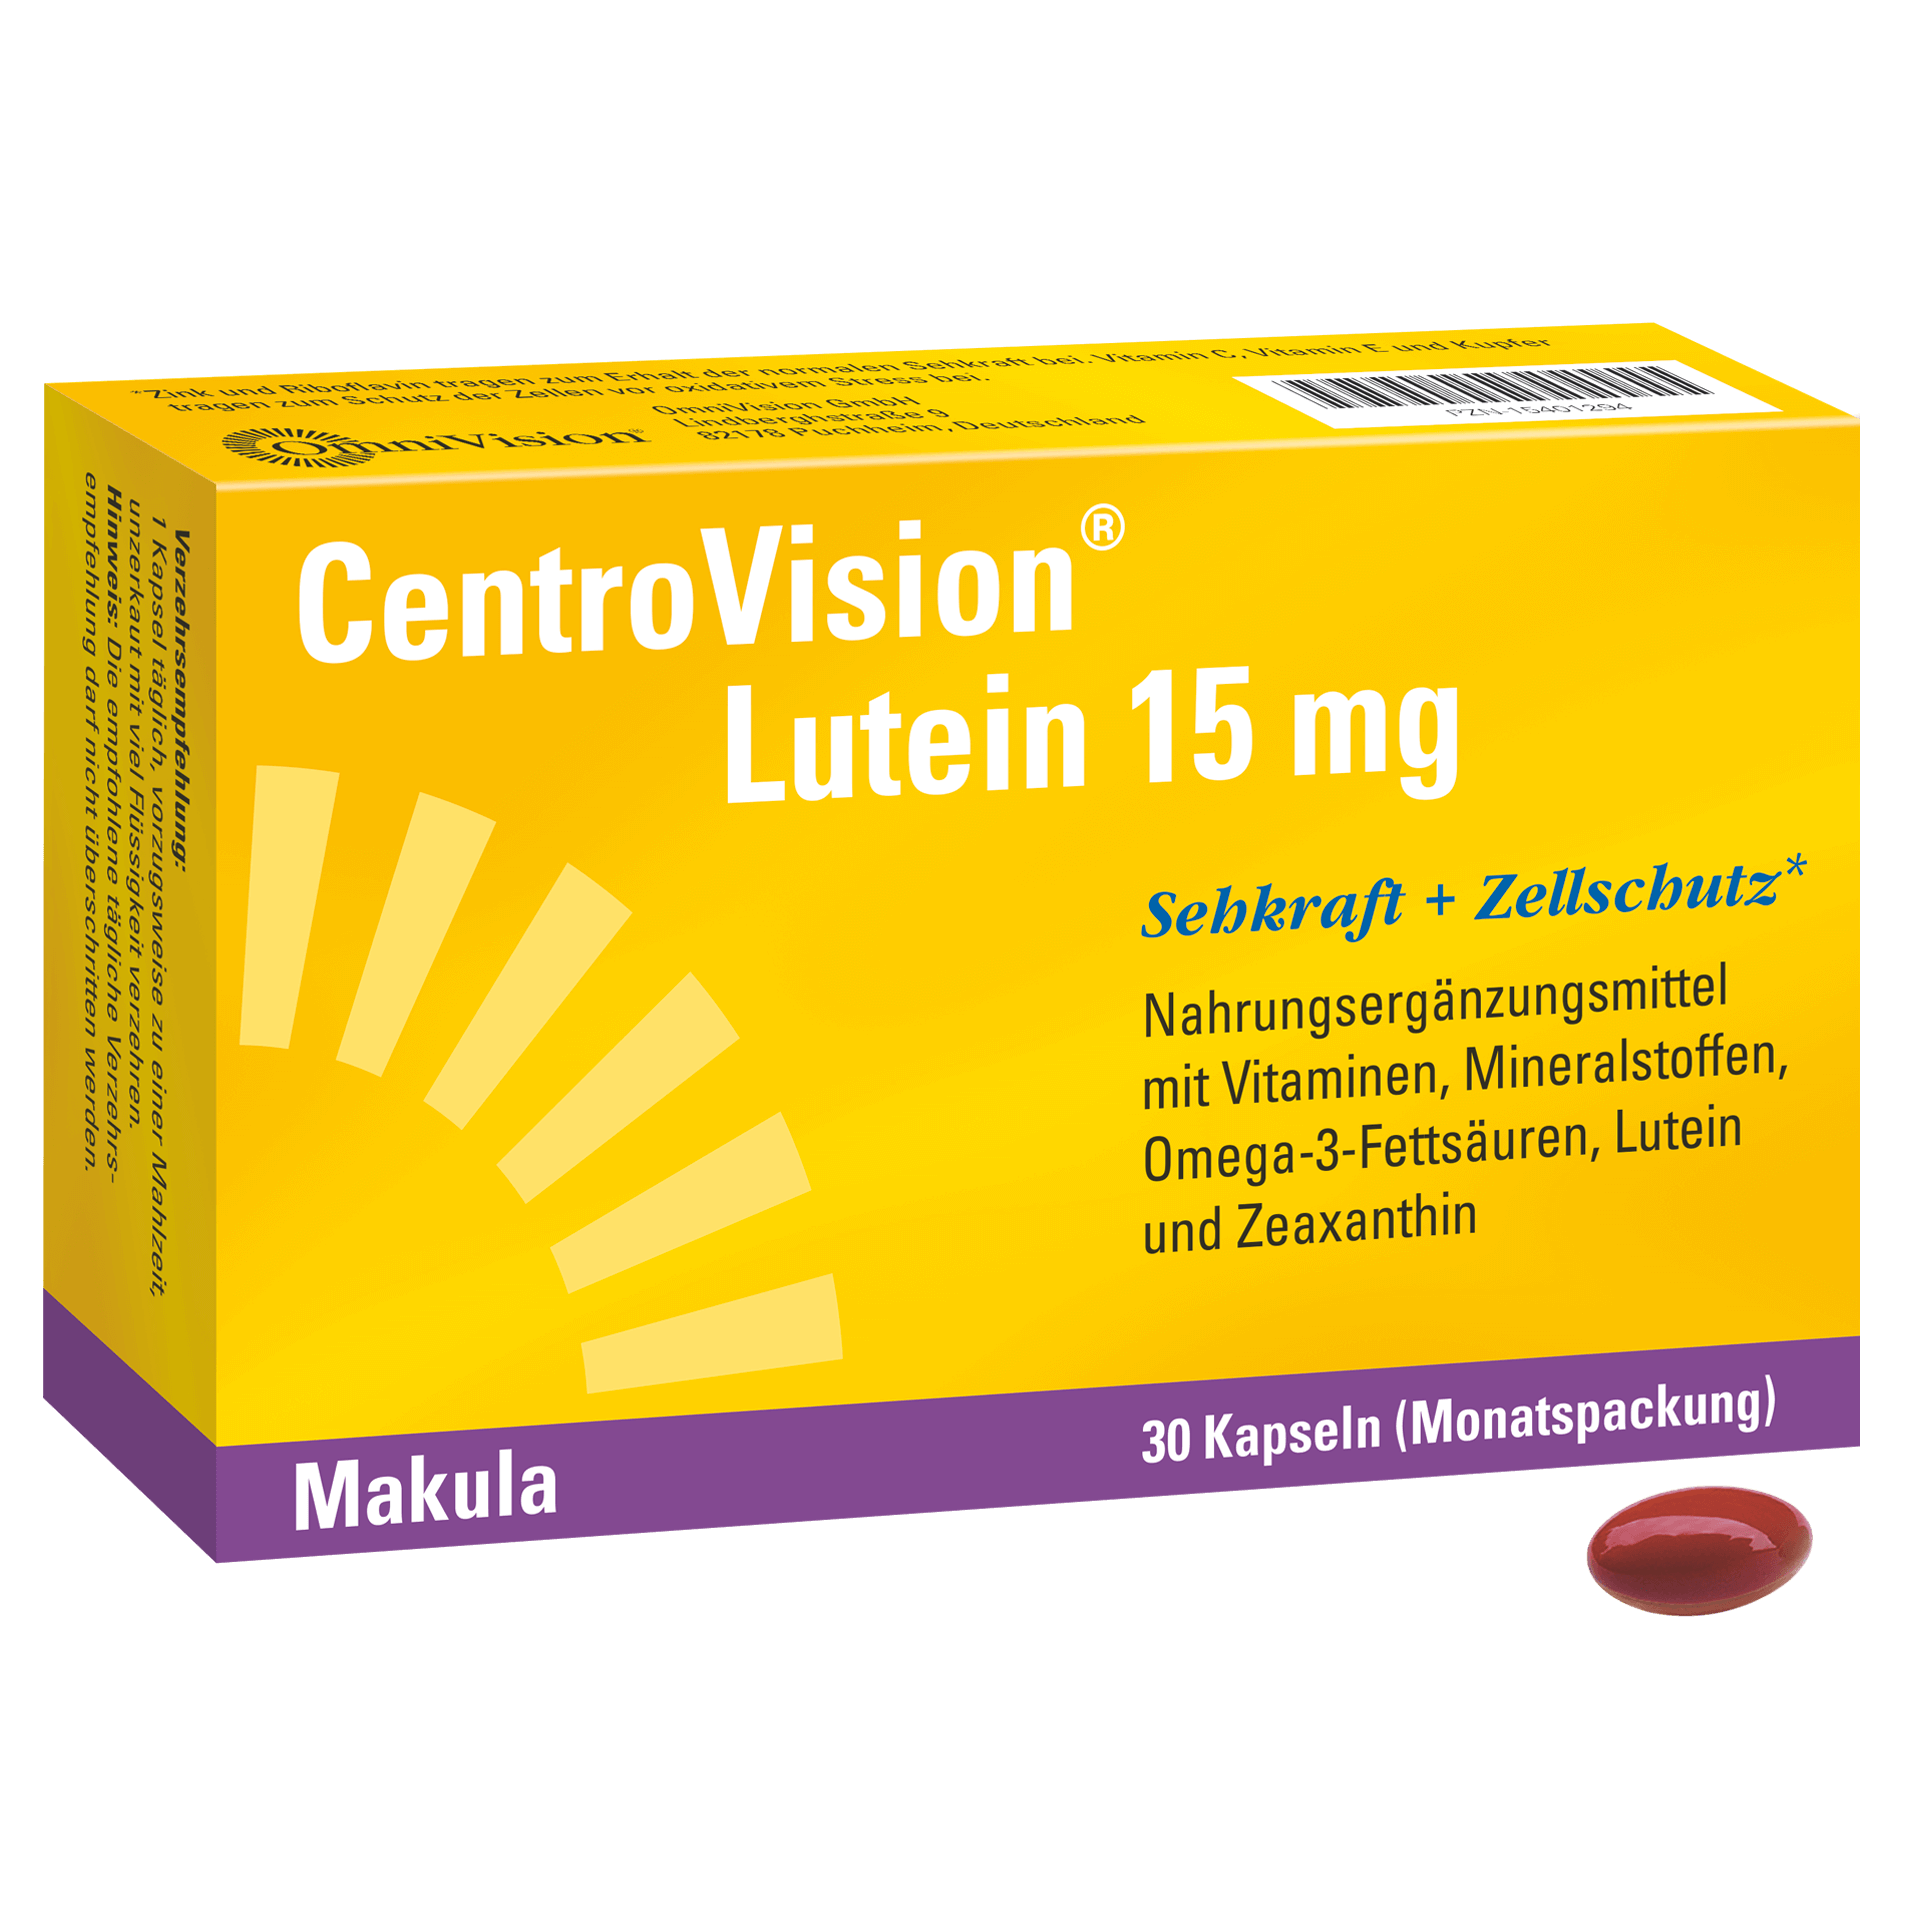 CentroVision® Lutein 15 mg